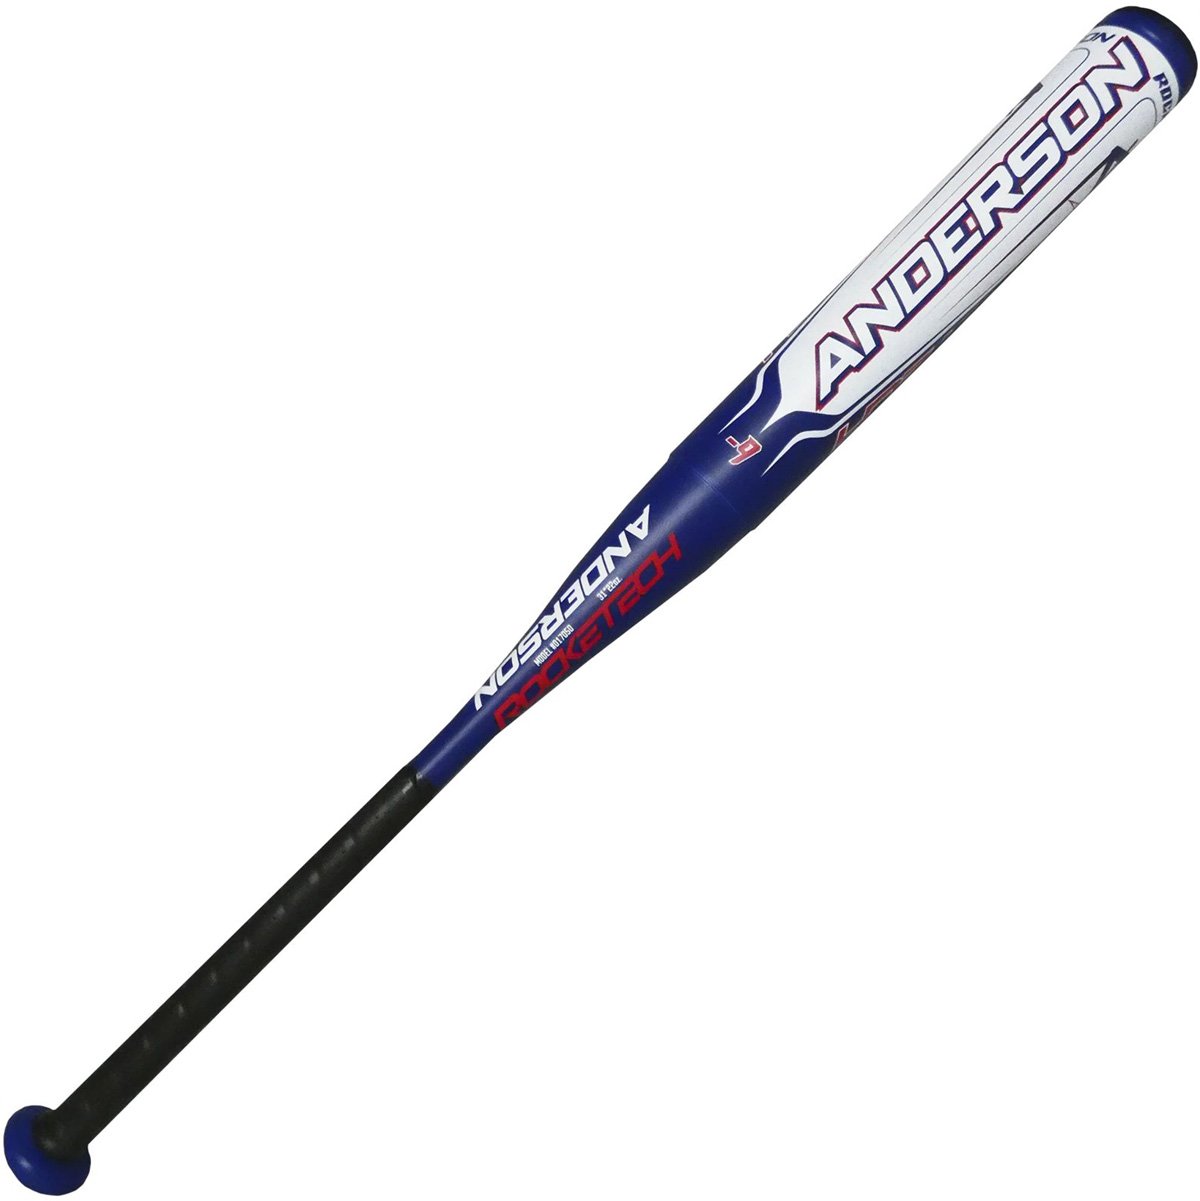 anderson-rocketech-2022-fastpitch-9-softball-bat-33-inch-24-oz 017050-3324 Anderson 854378000656 <p>The Anderson Rocketech has spent almost two decades dominating the fastpitch